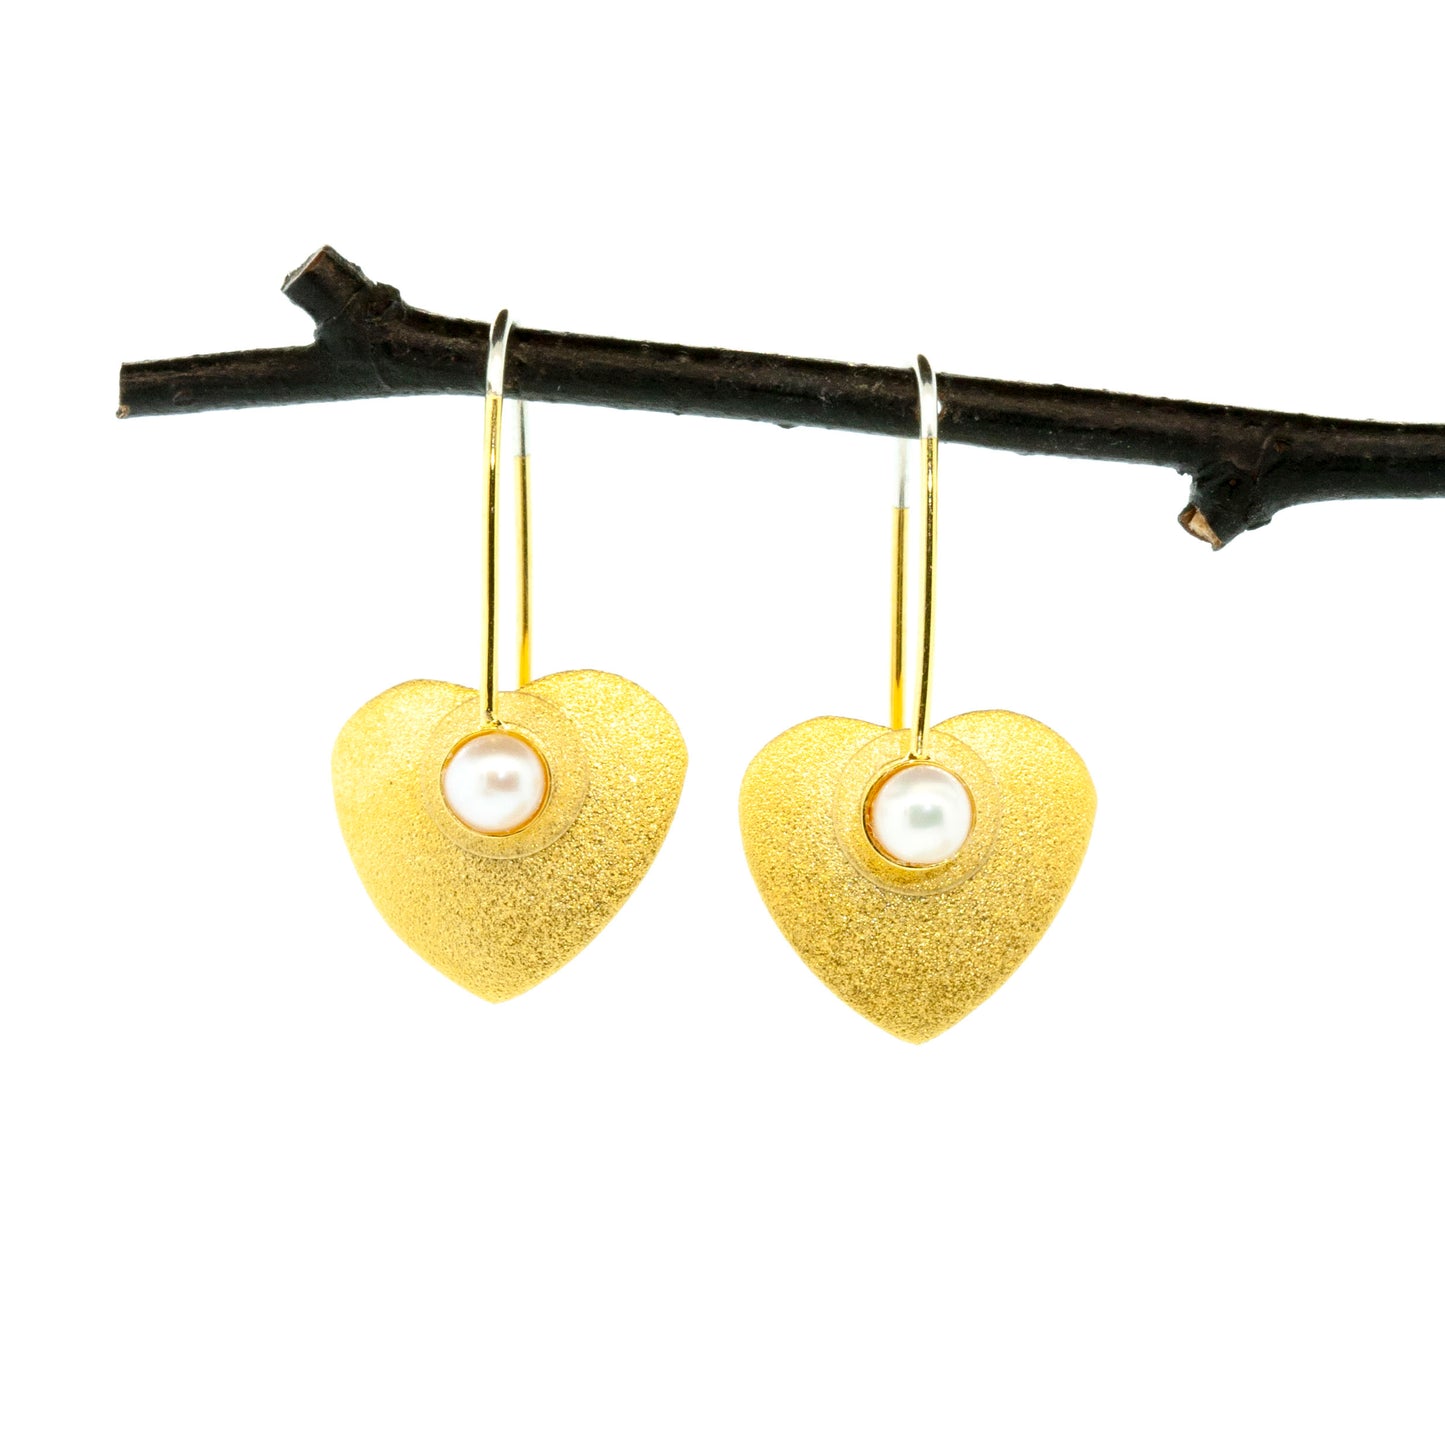 Tiny Heart Earrings--Donation to Domestic Violence Services